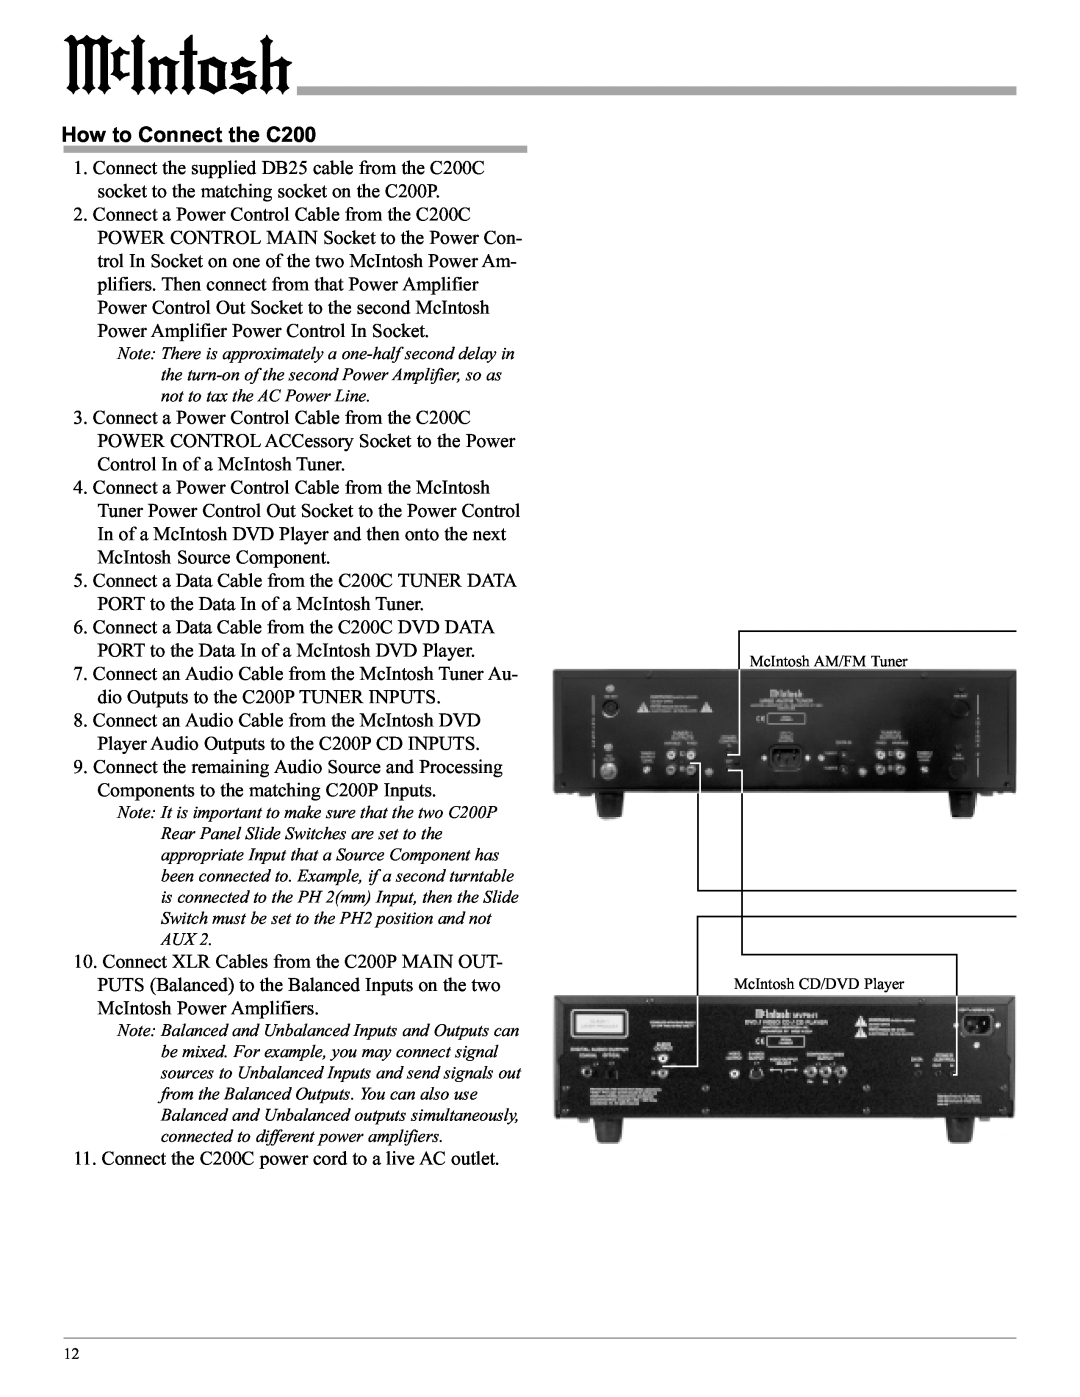 McIntosh manual How to Connect the C200 